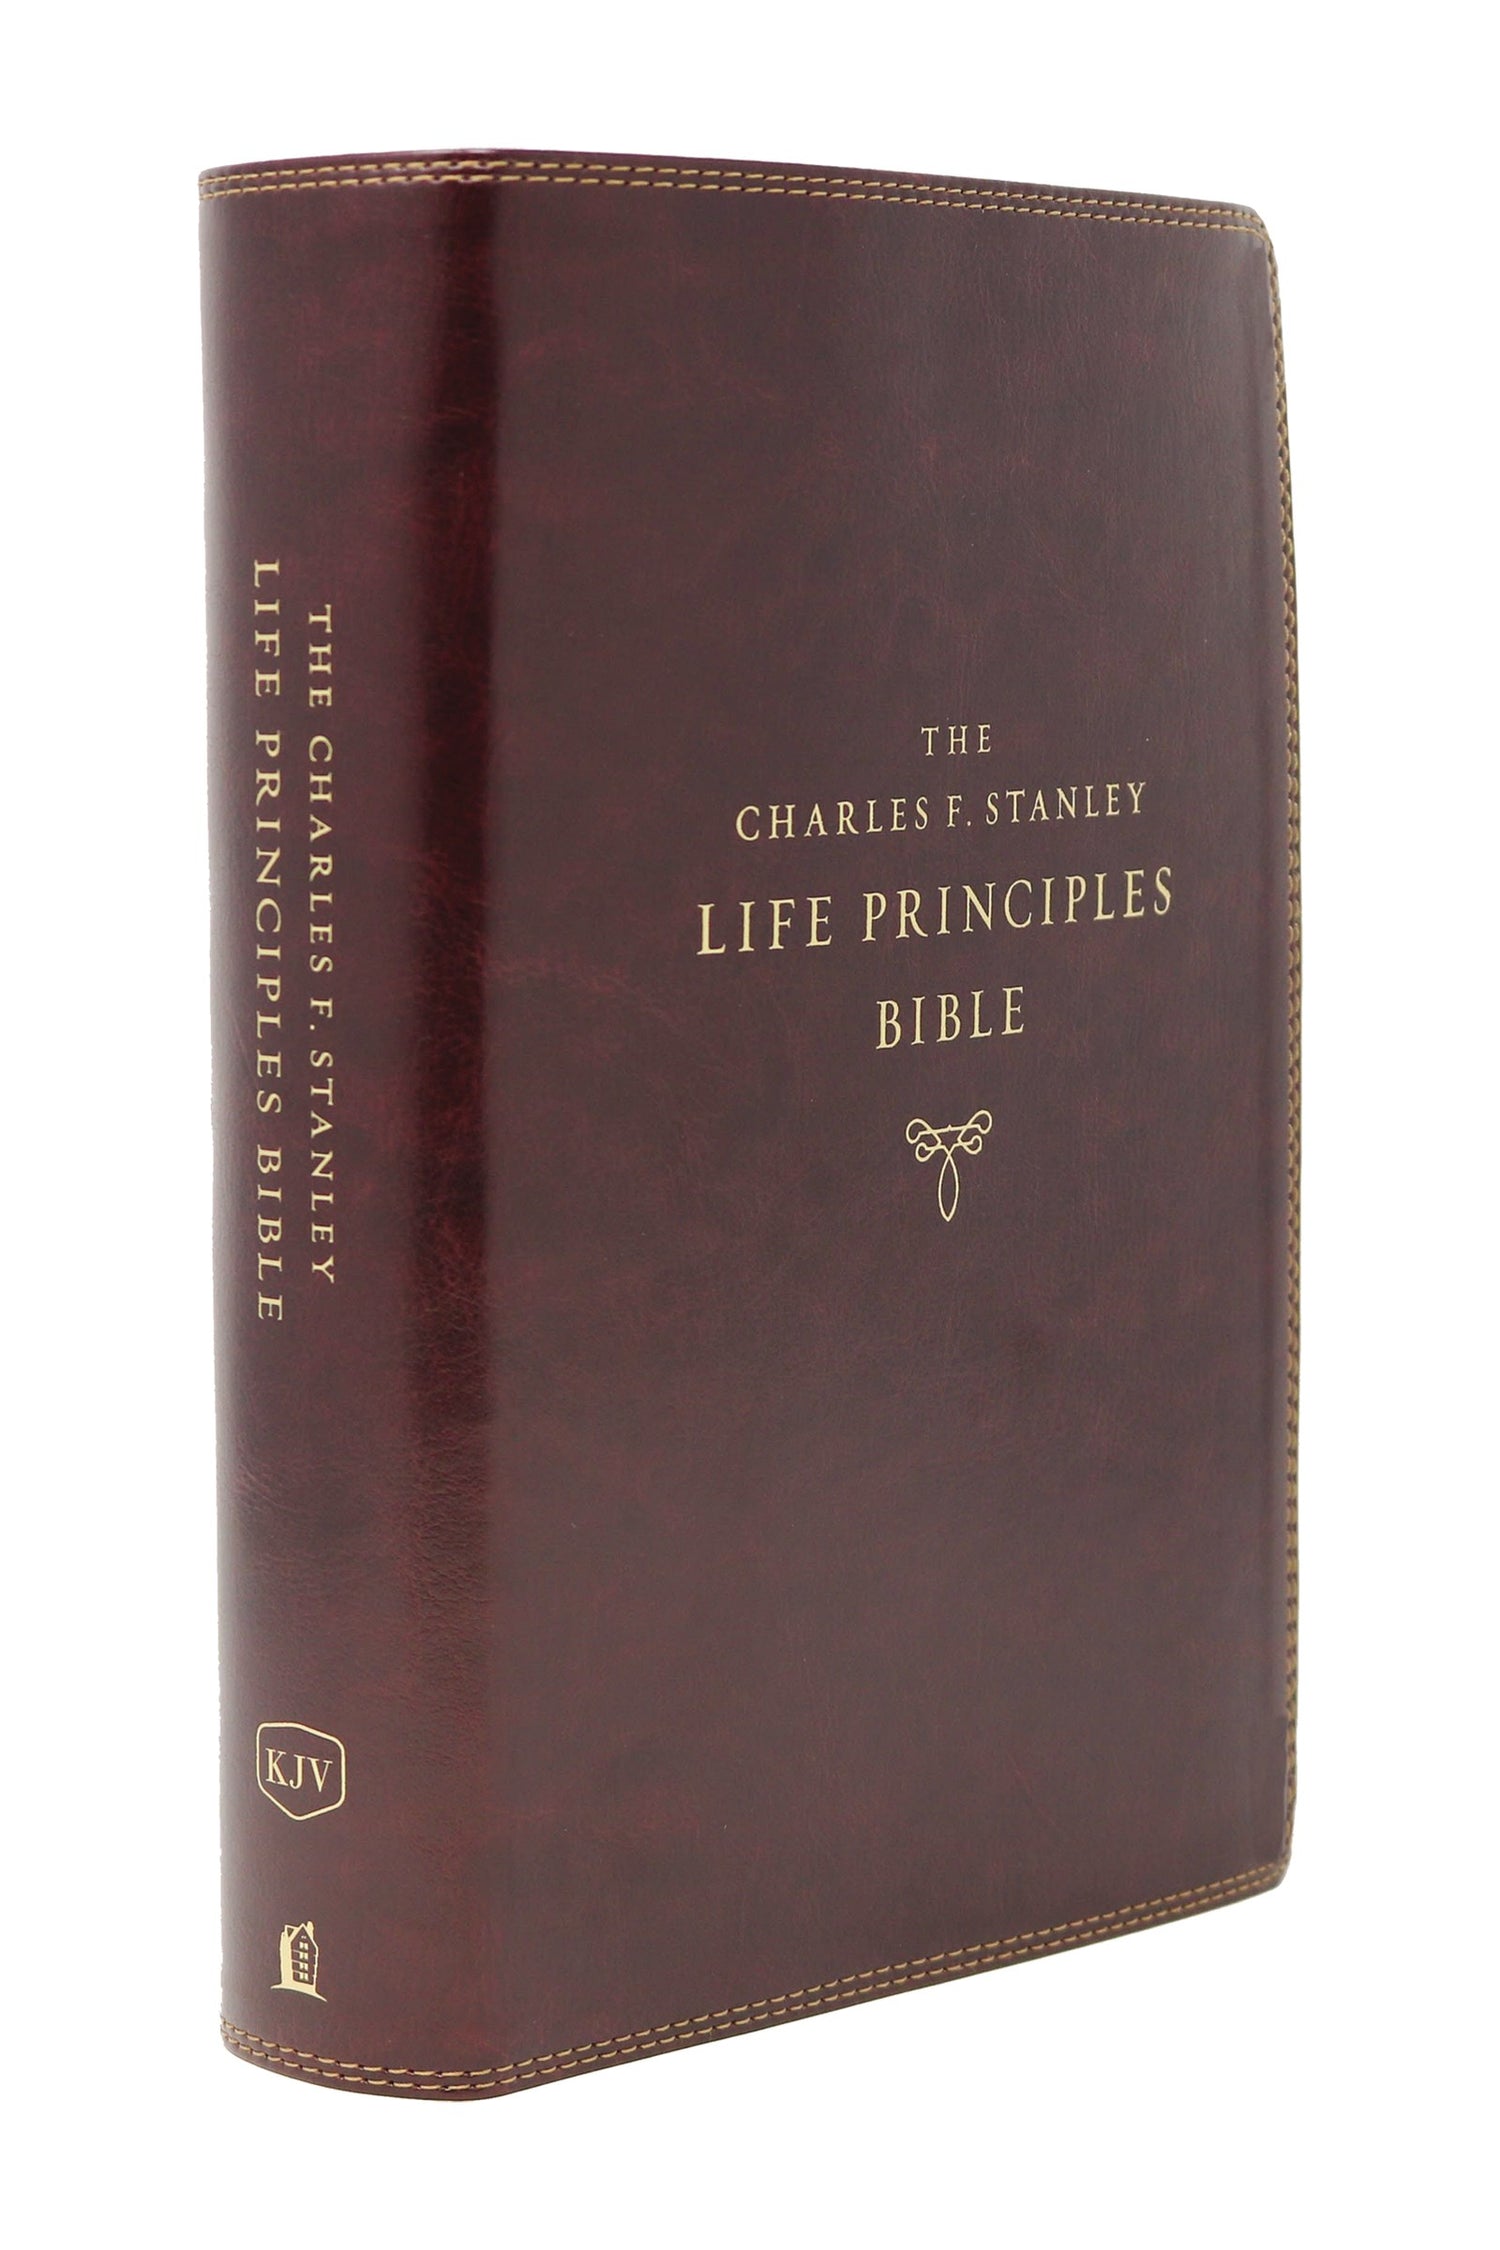 Seed of Abraham Christian Bookstore - (In)Courage - KJV Charles F. Stanley Life Principles Bible (2nd Edition) (Comfort Print)-Burgundy Leathersoft Indexed